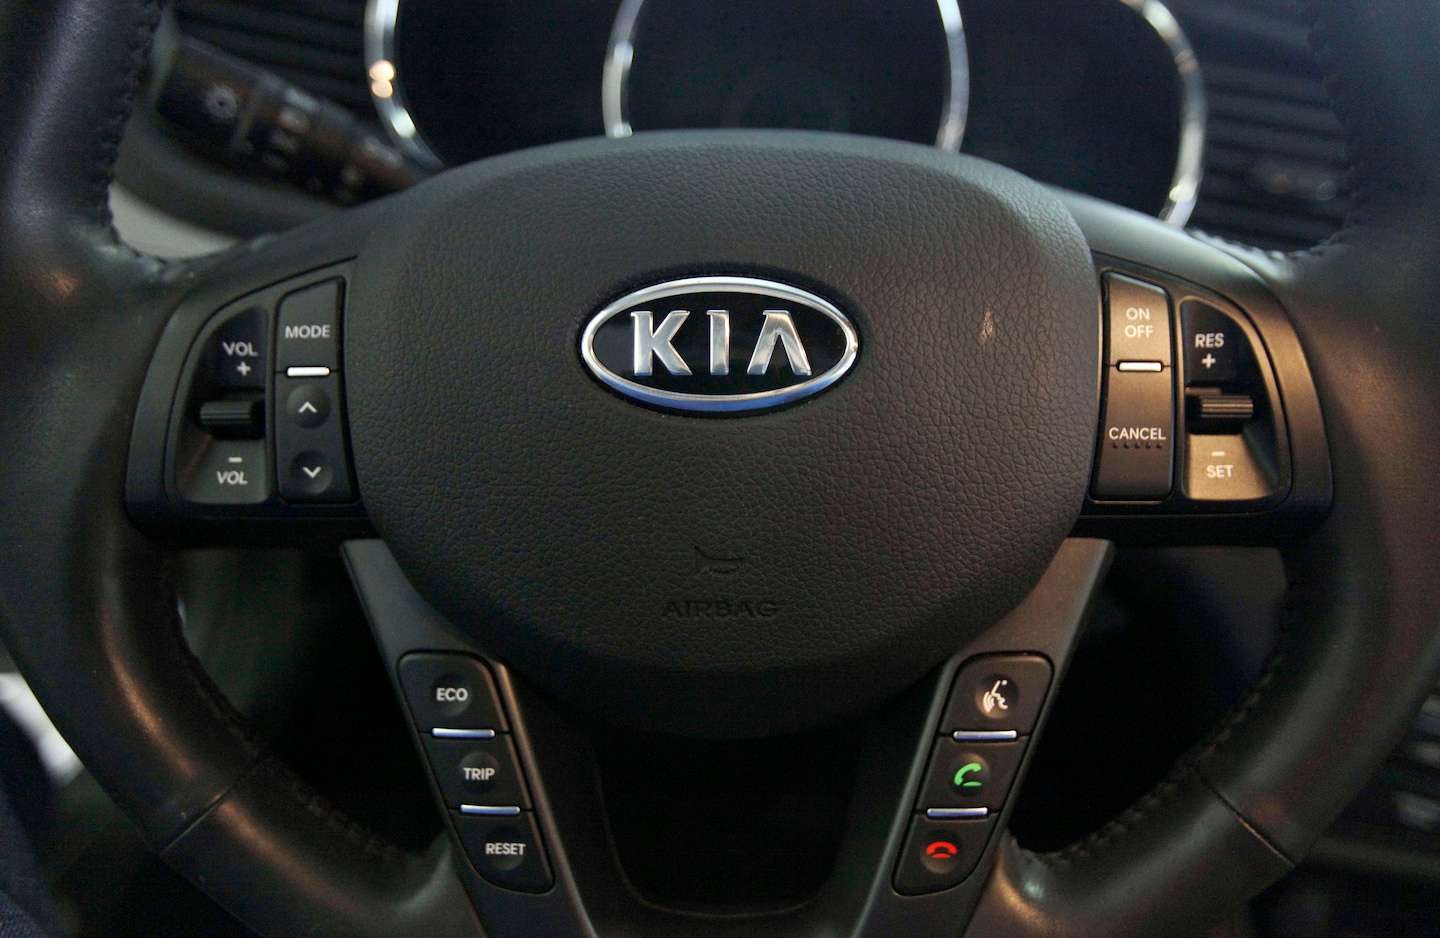 Kia cars are being stolen nationwide as how-to videos swirl online